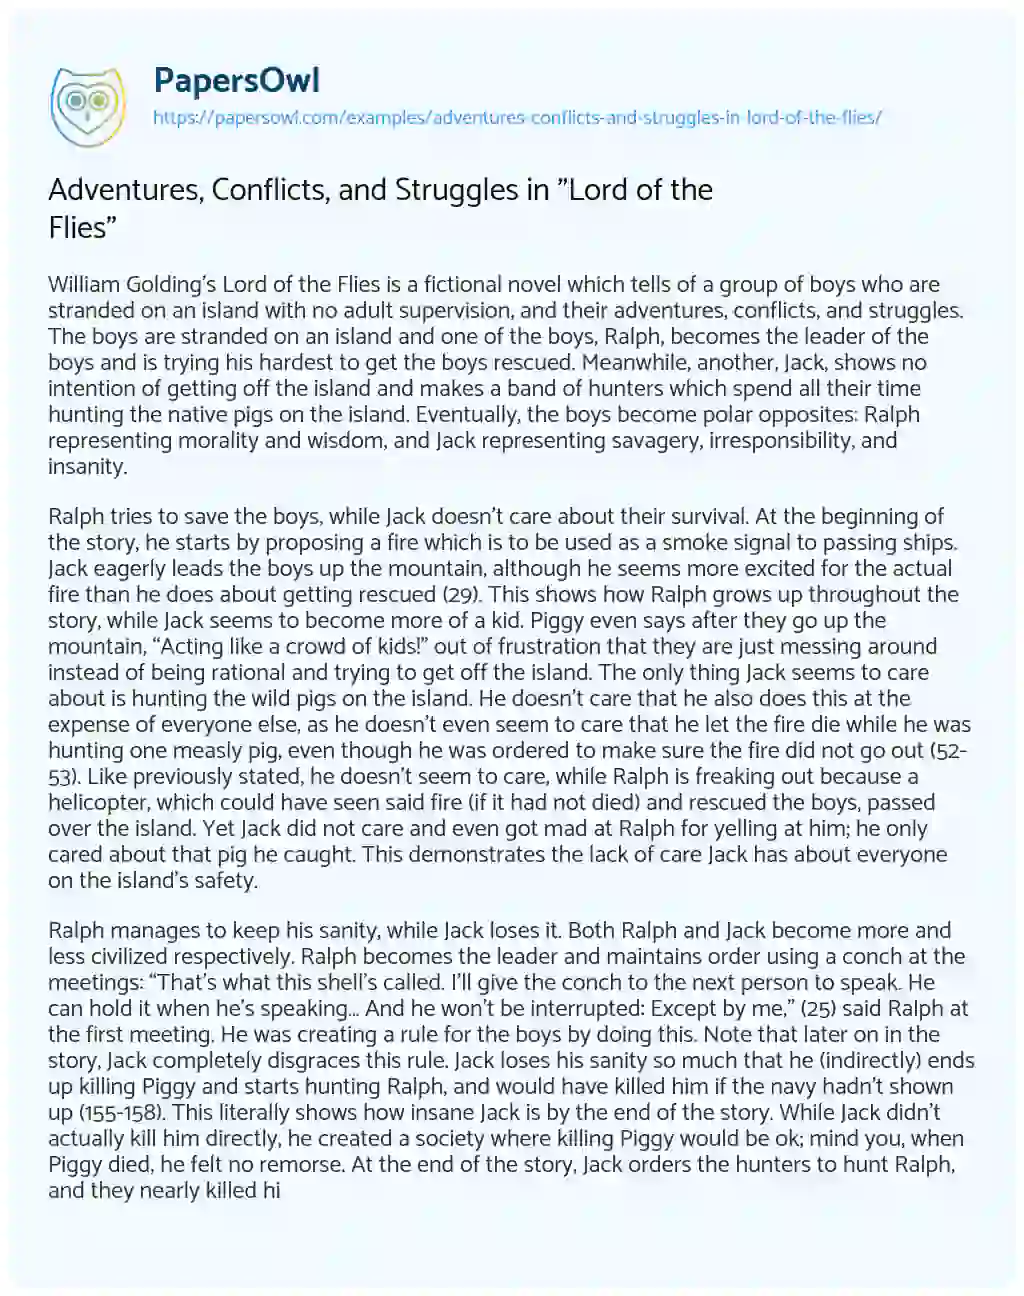 Essay on Adventures, Conflicts, and Struggles in “Lord of the Flies”